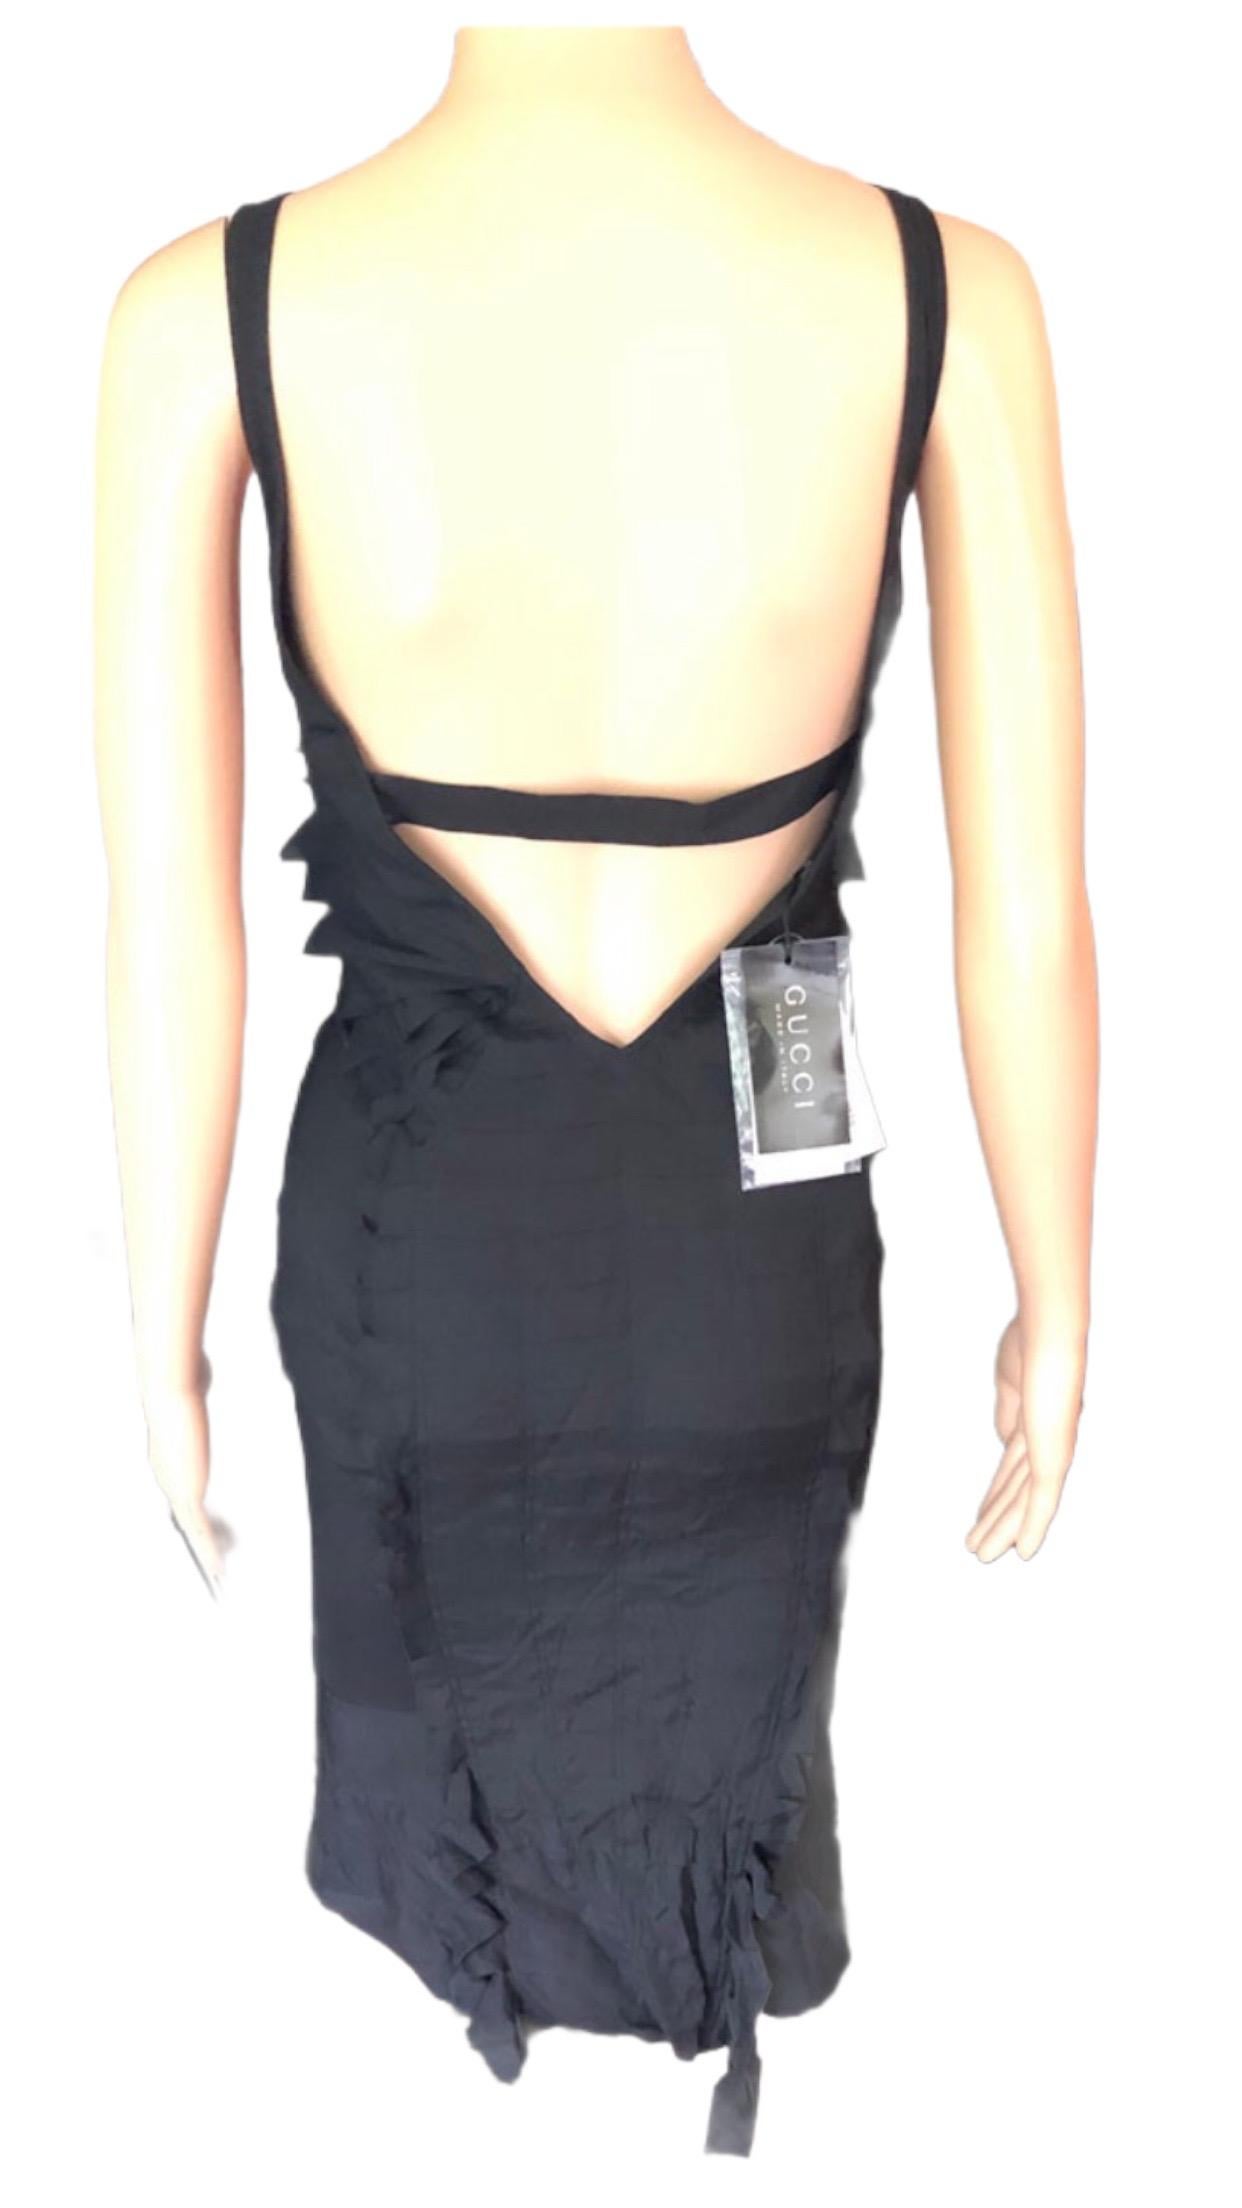 Gucci by Tom Ford S/S 2004 Cutout Black Dress For Sale 3